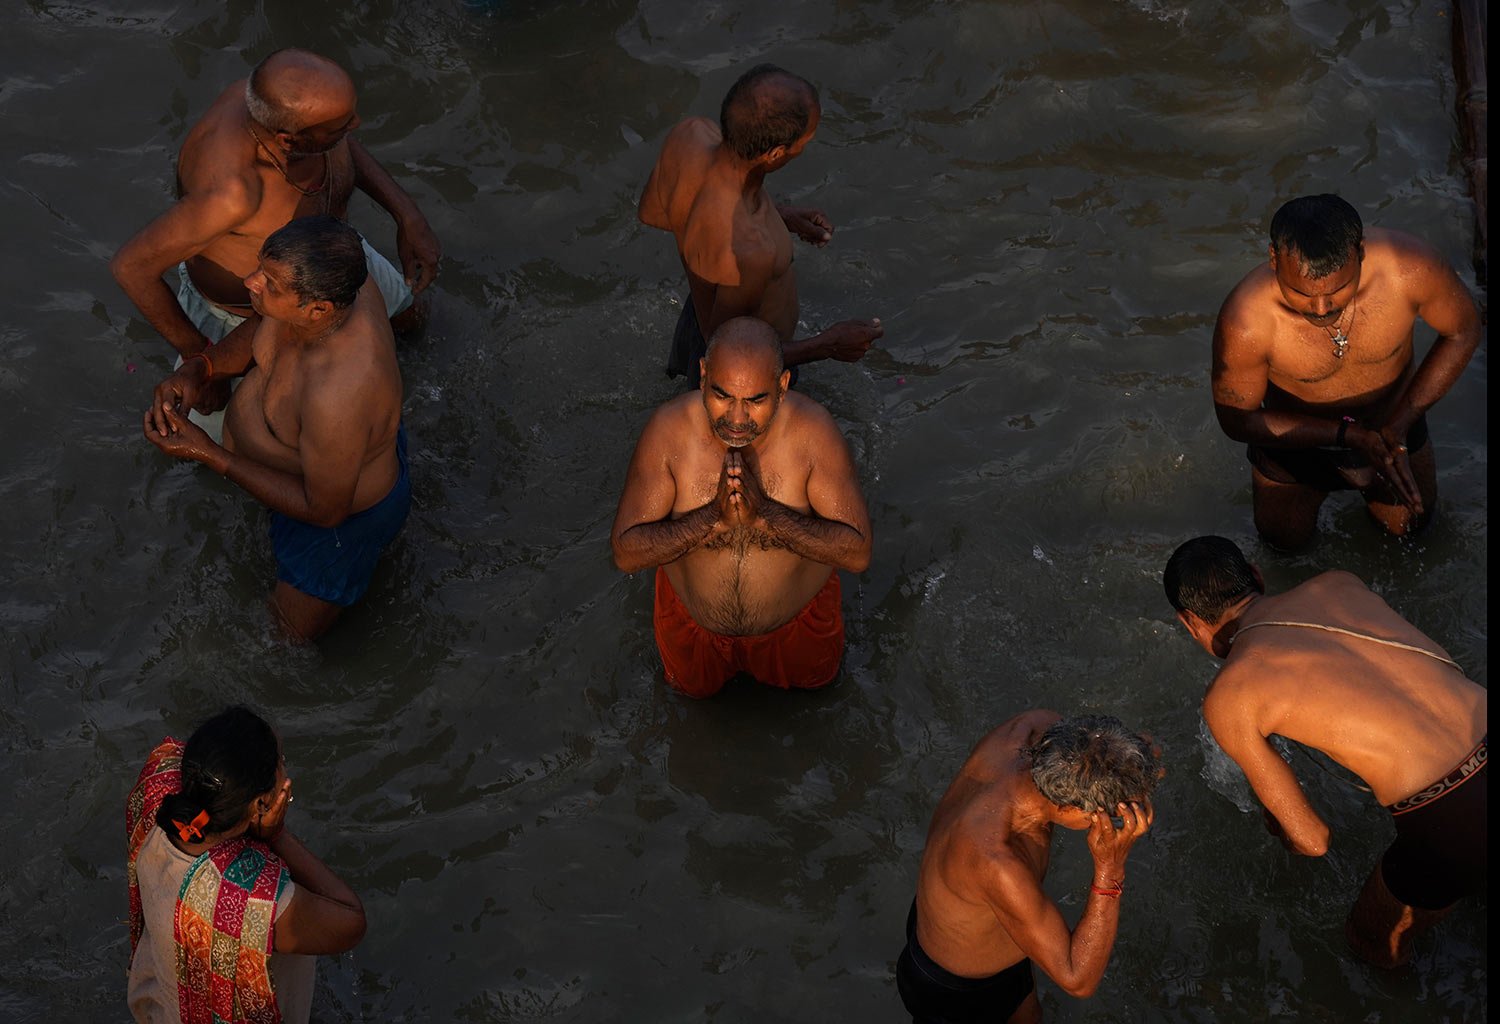  Devotees take holy dips and pray in the river Saryu on the occasion of Ramnavi festival, celebrated as the birthday of Hindu God Rama, in Ayodhya, India, Thursday, March 30, 2023. (AP Photo/Manish Swarup) 